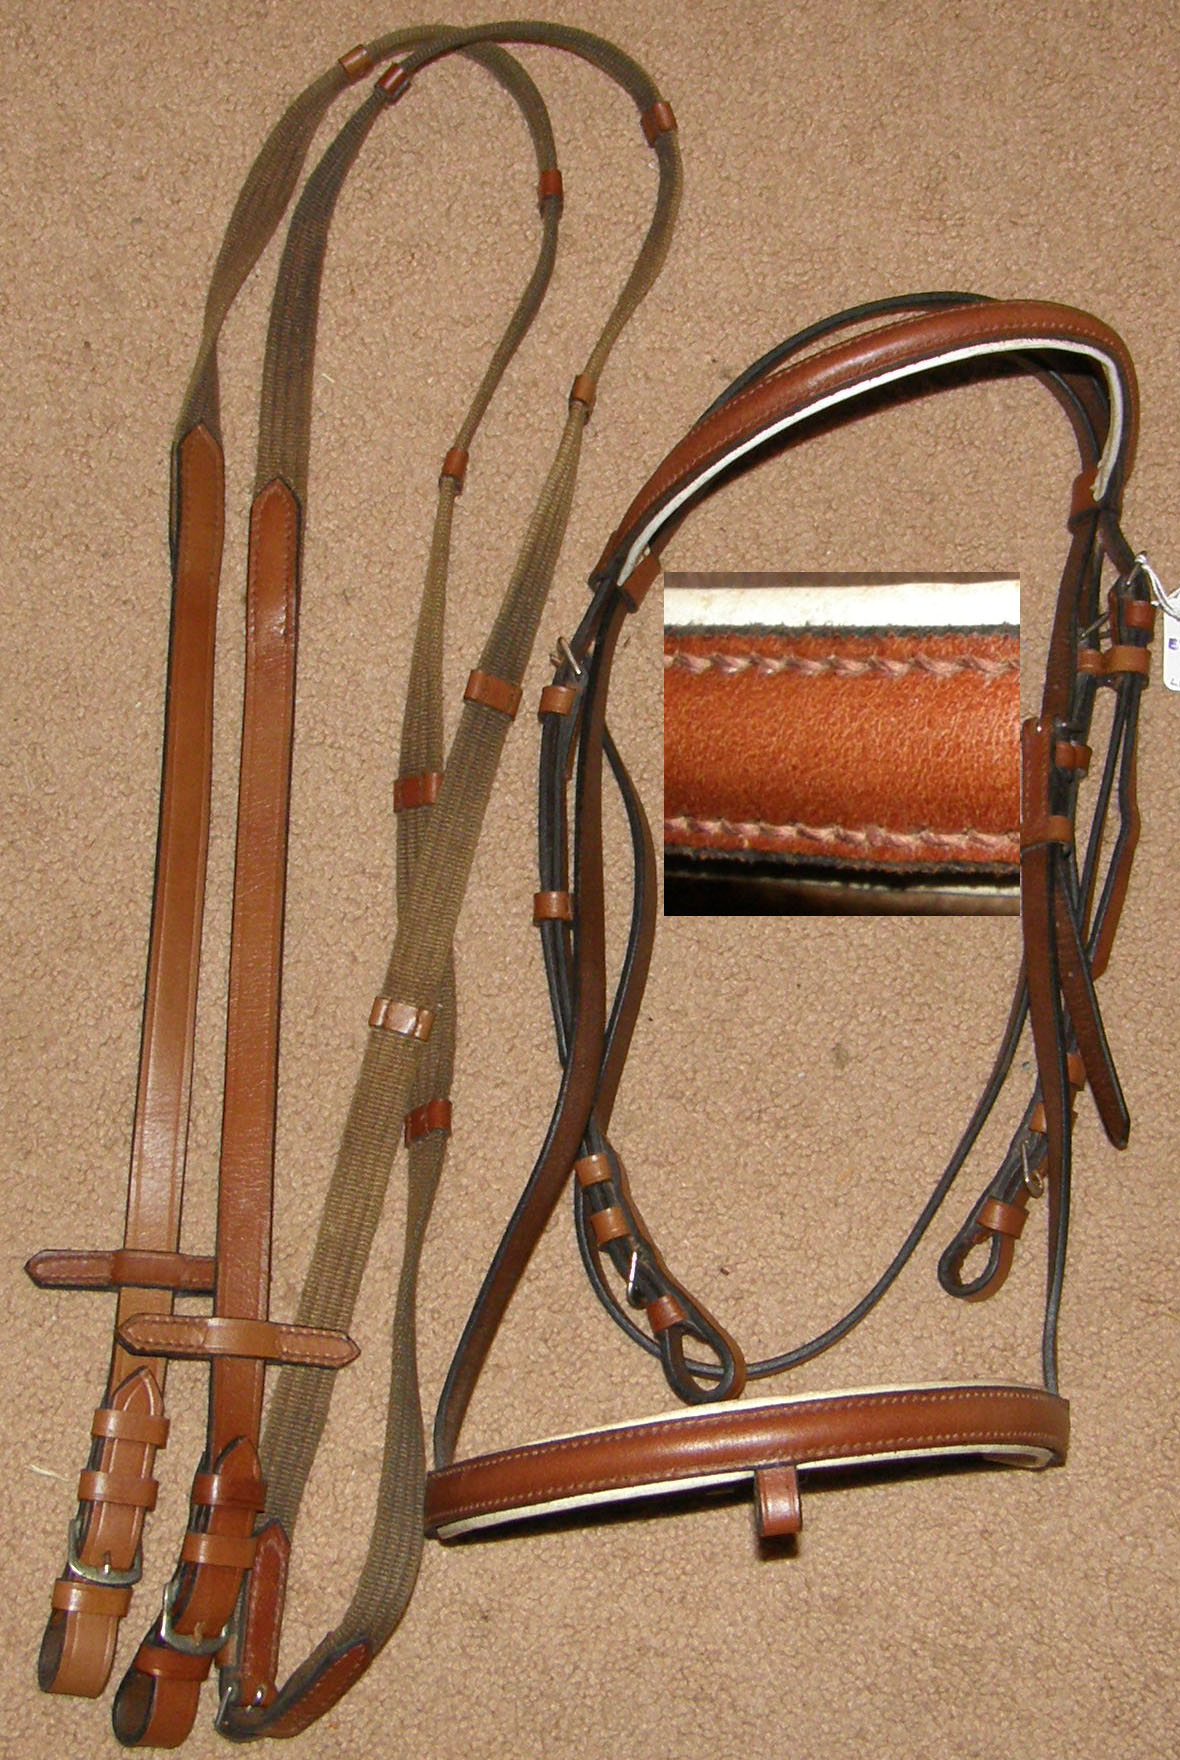 Round Raised Snaffle Bridle White Leather Lined English Bridle Buckle End Cotton Web Reins Chestnut London Tan Horse